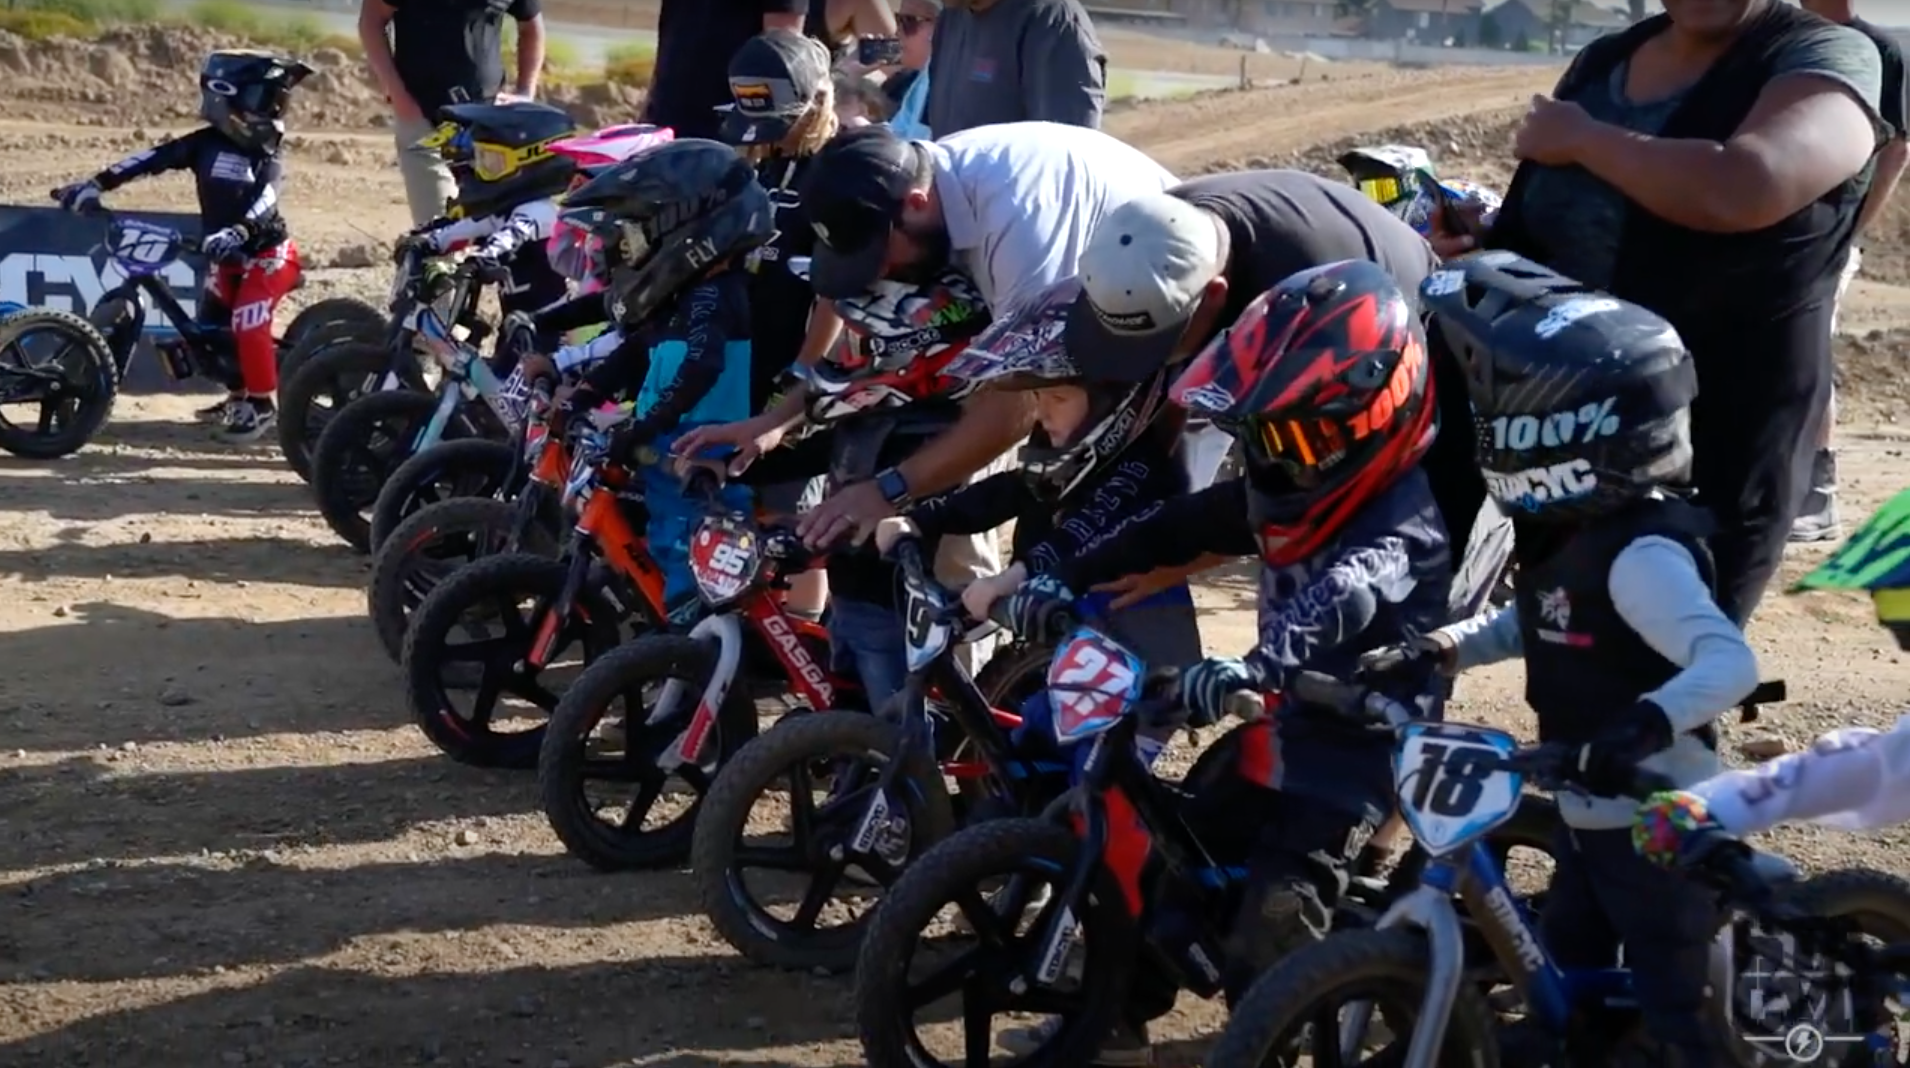 STACYC Gromcross Takes Over At The 2022 Mini Major West